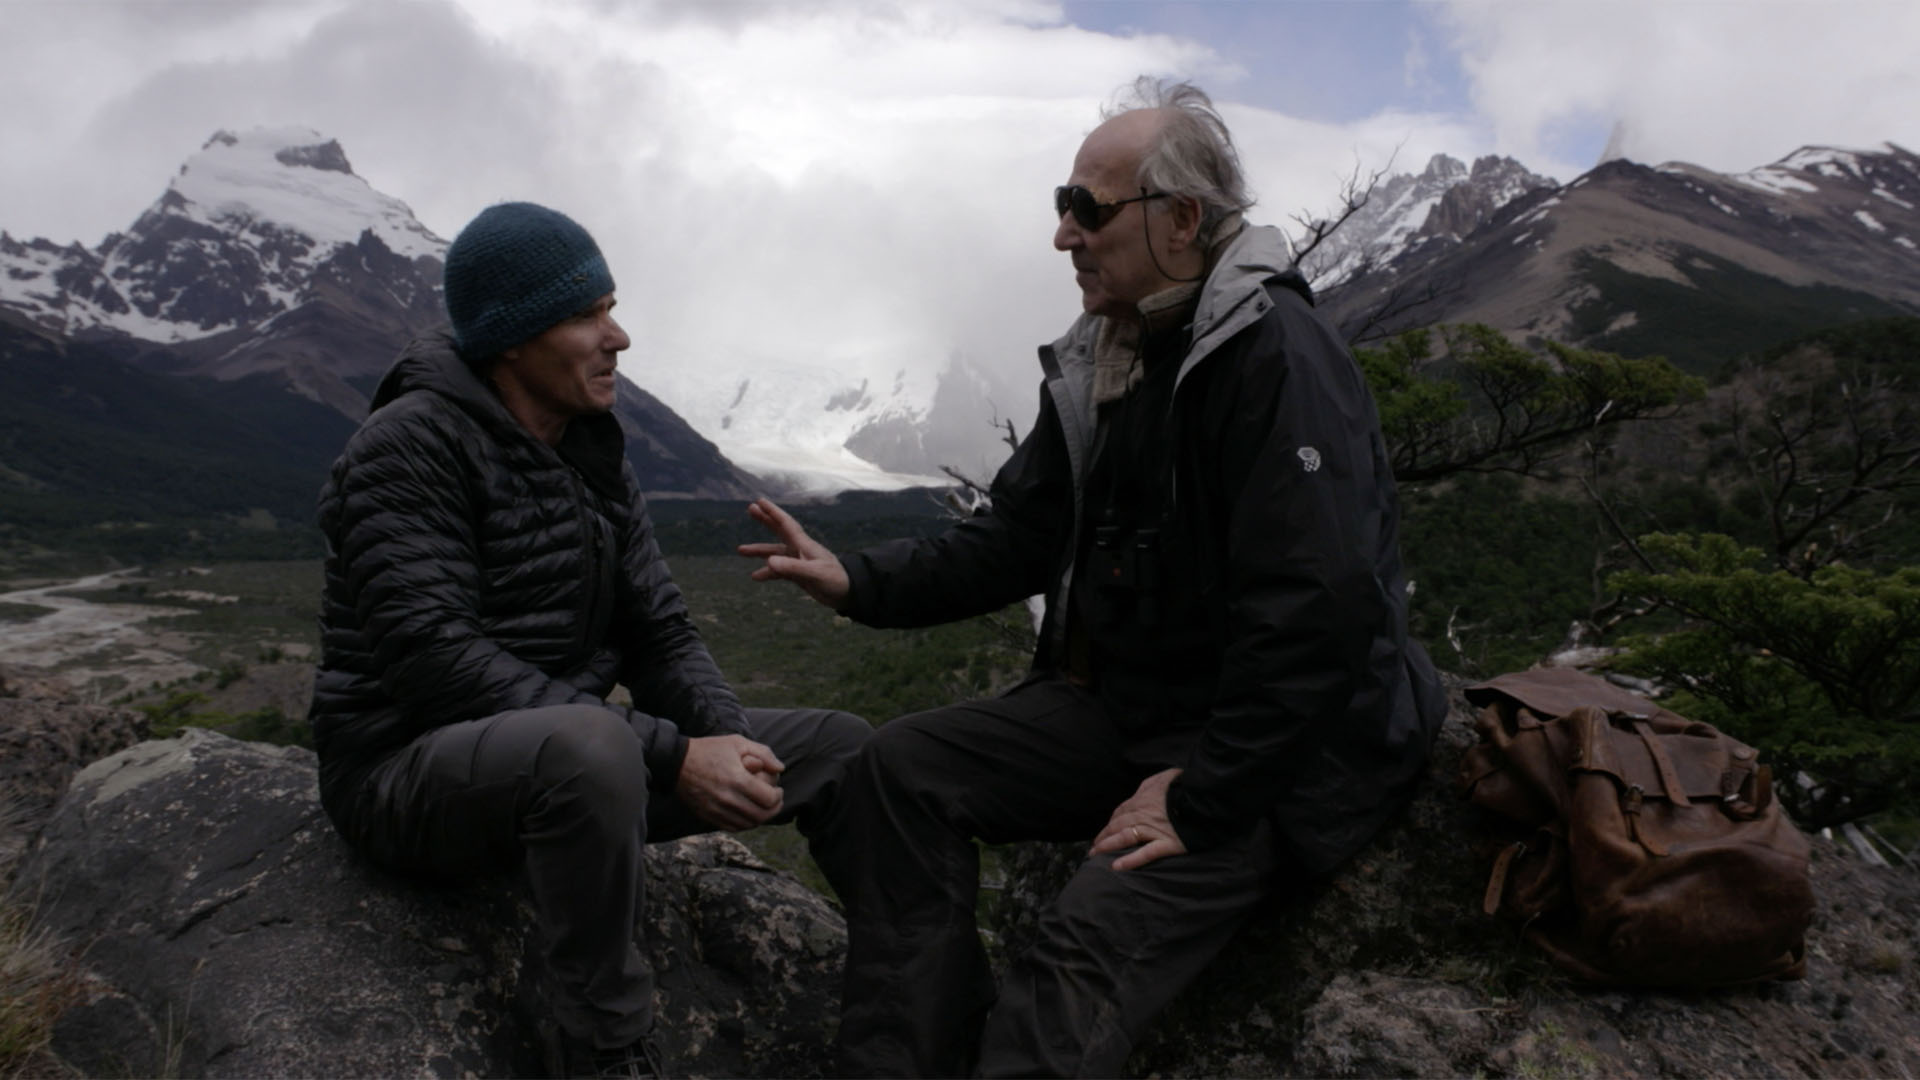 Trailer still frame from Nomad, two men talking at mountains